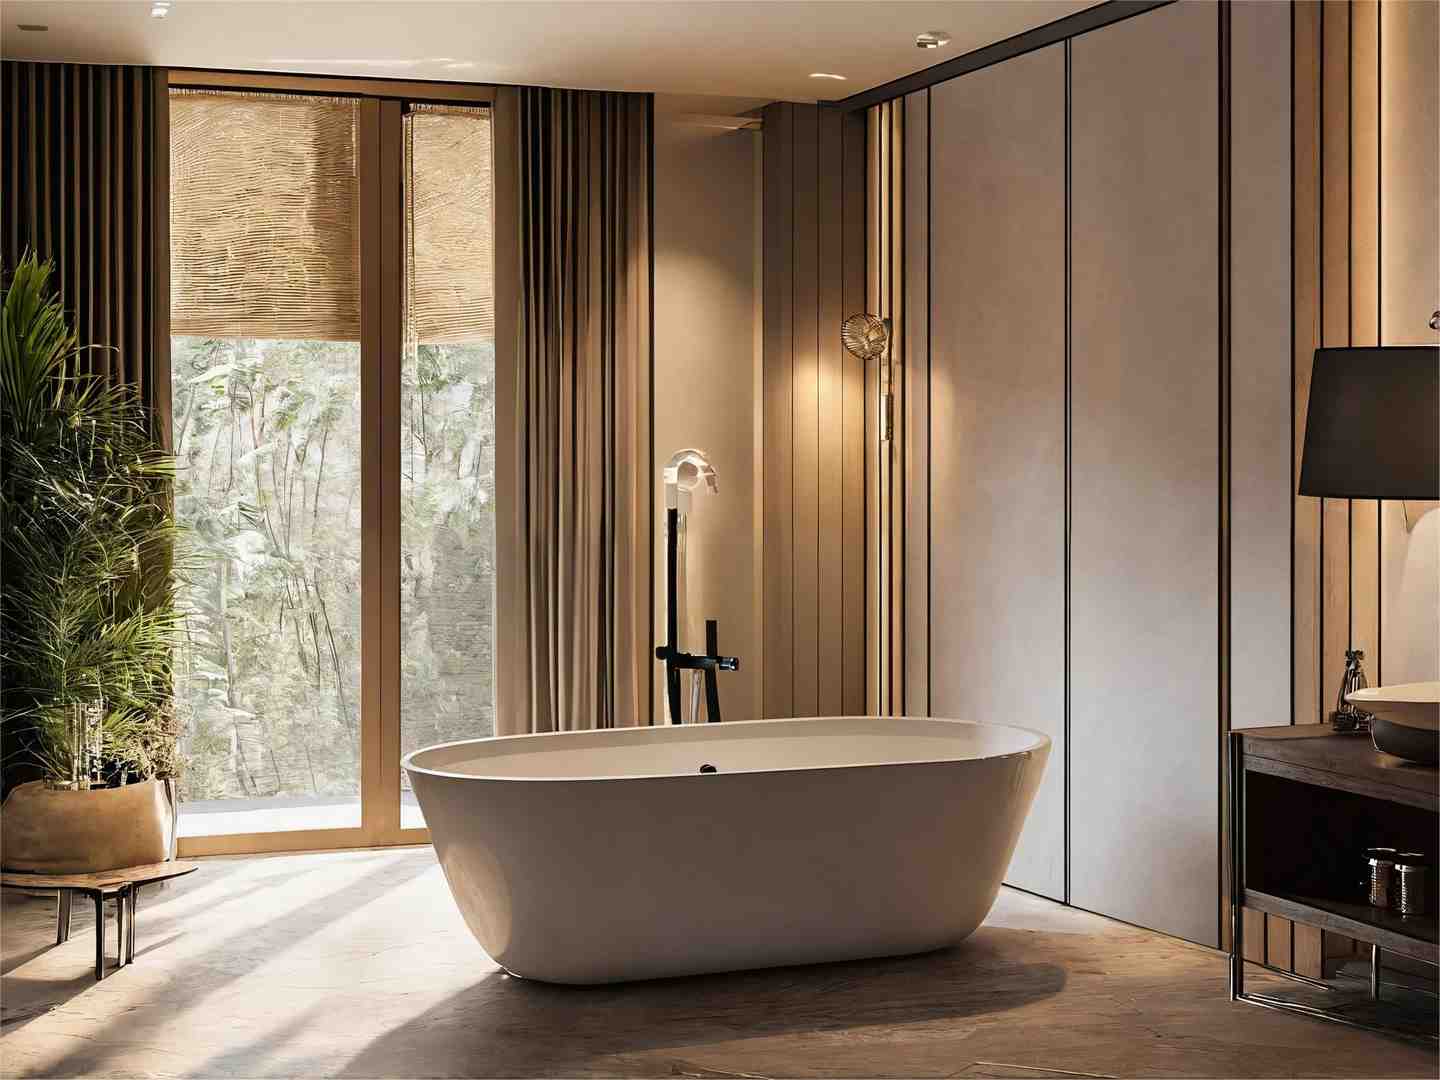 With the bathtub as the main display product (Copy)